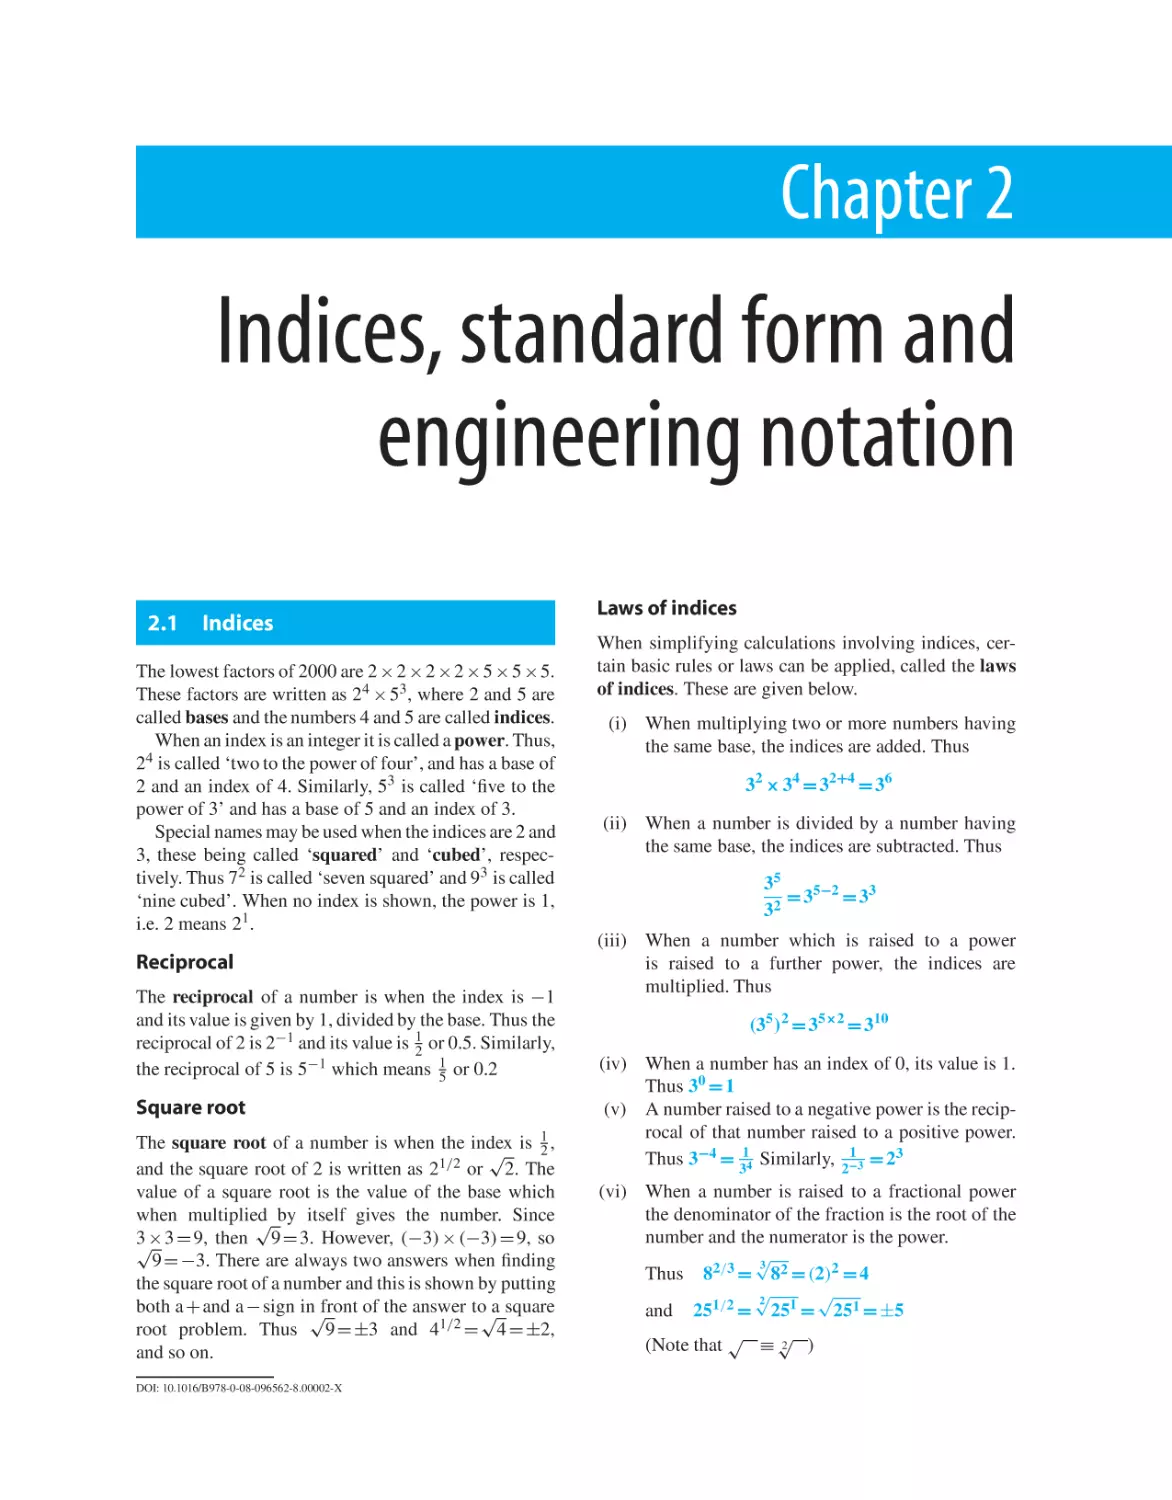 Chapter 2. Indices, standard form and engineering notation
2.1 Indices